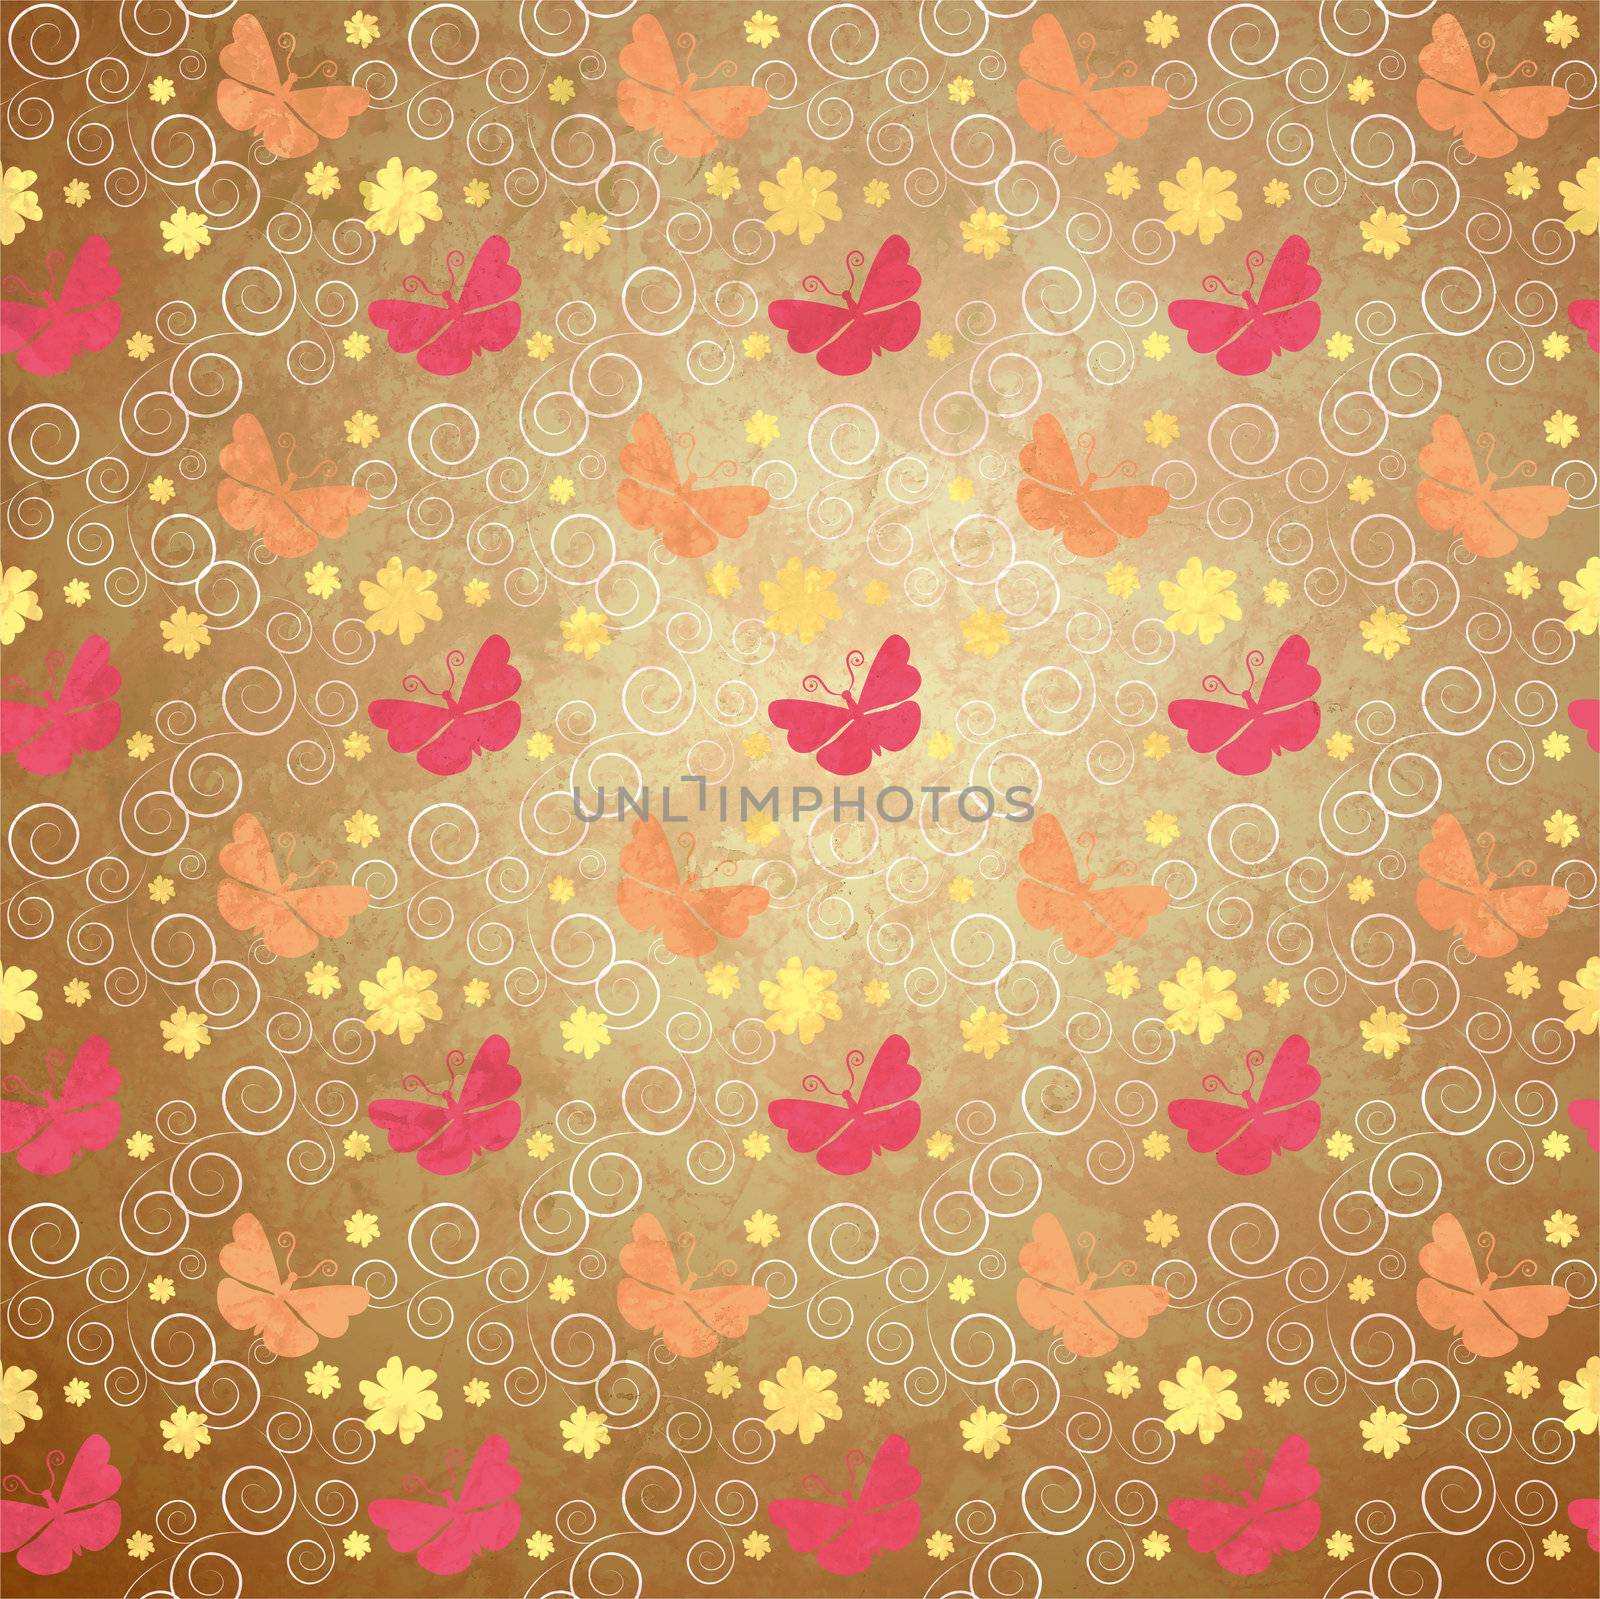 flowers and butterflies grunge style spring background vintage paper